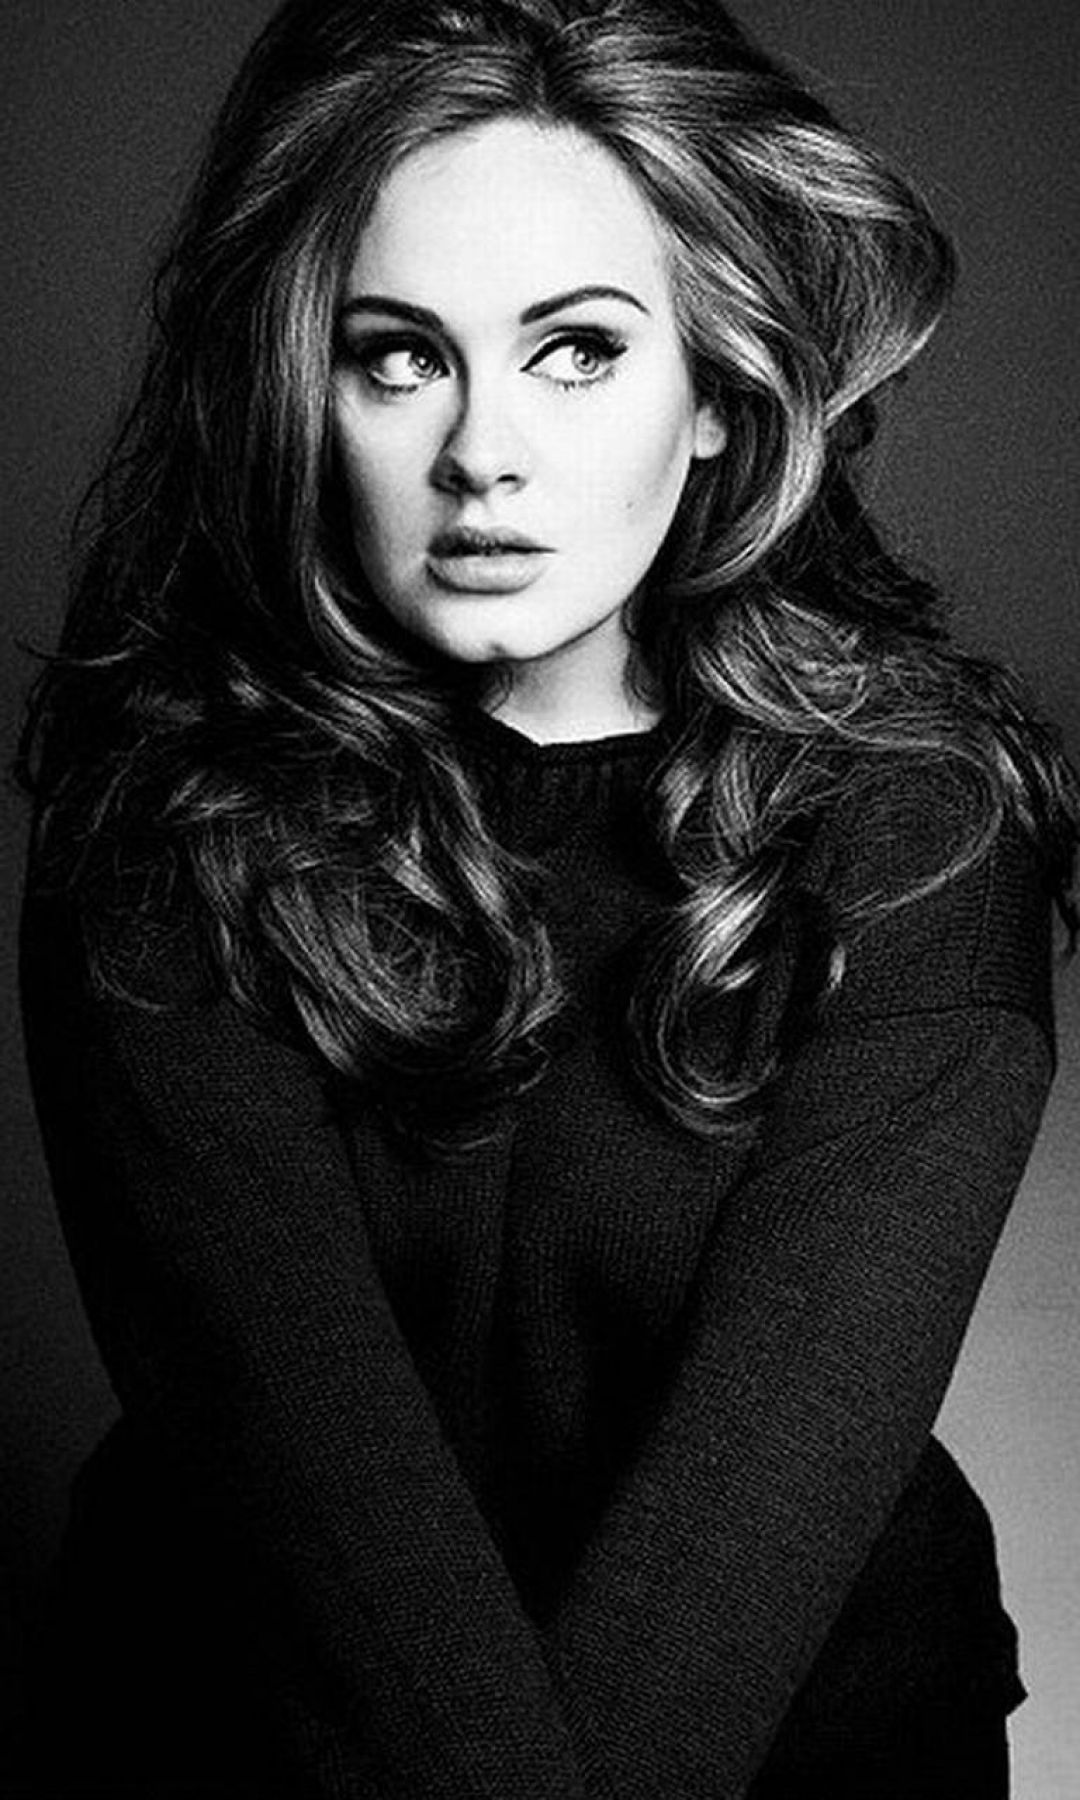 Android, Iphone, Desktop Hd Backgrounds / Wallpapers - Adele 21 , HD Wallpaper & Backgrounds